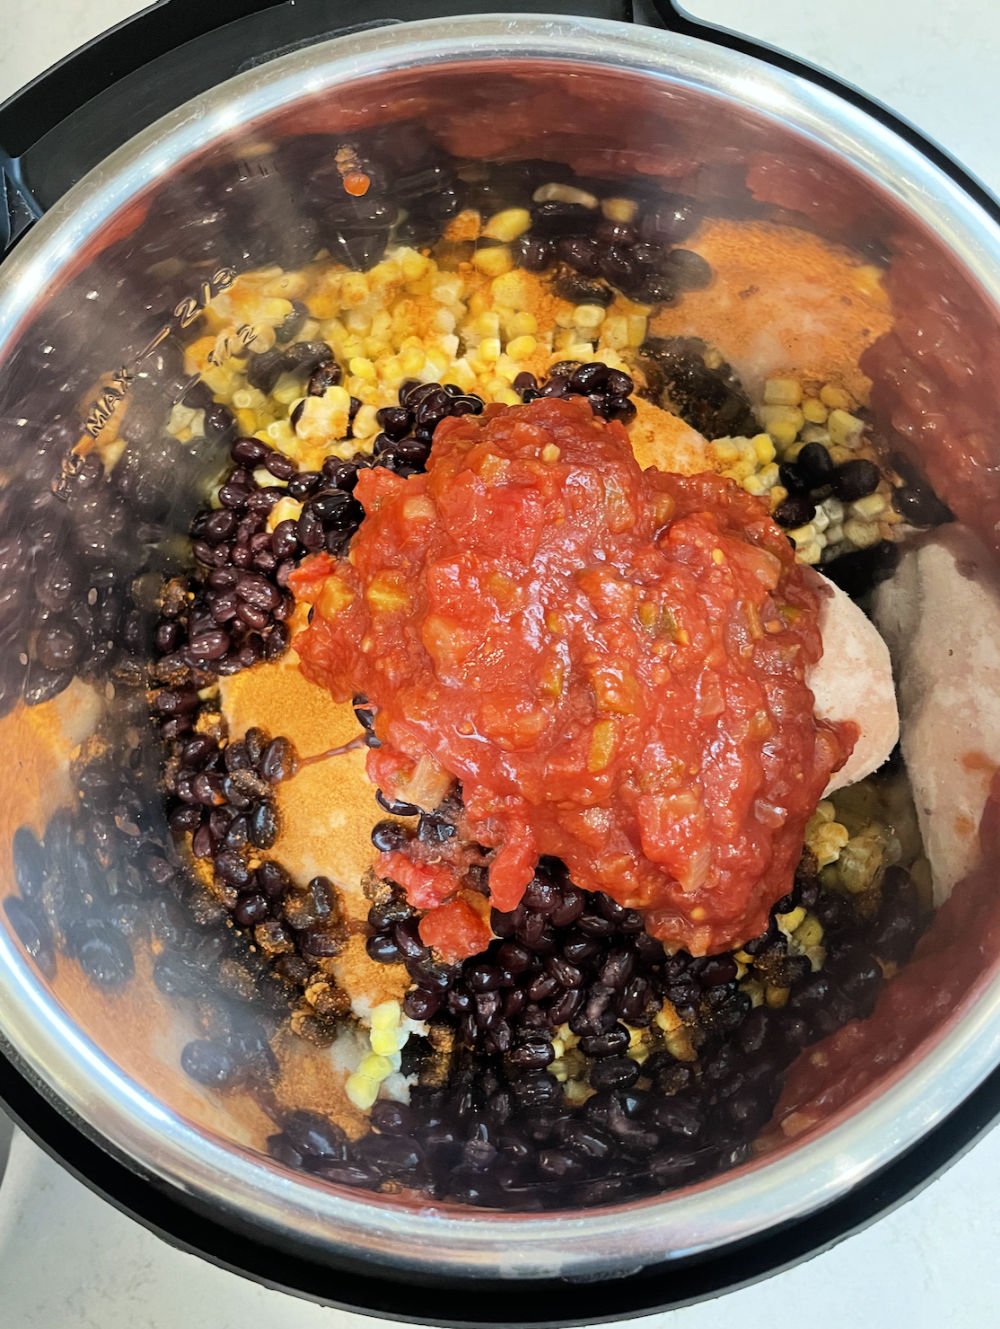 salsa, black beans, corn, and taco seasoning on top of chicken in the Instant Pot